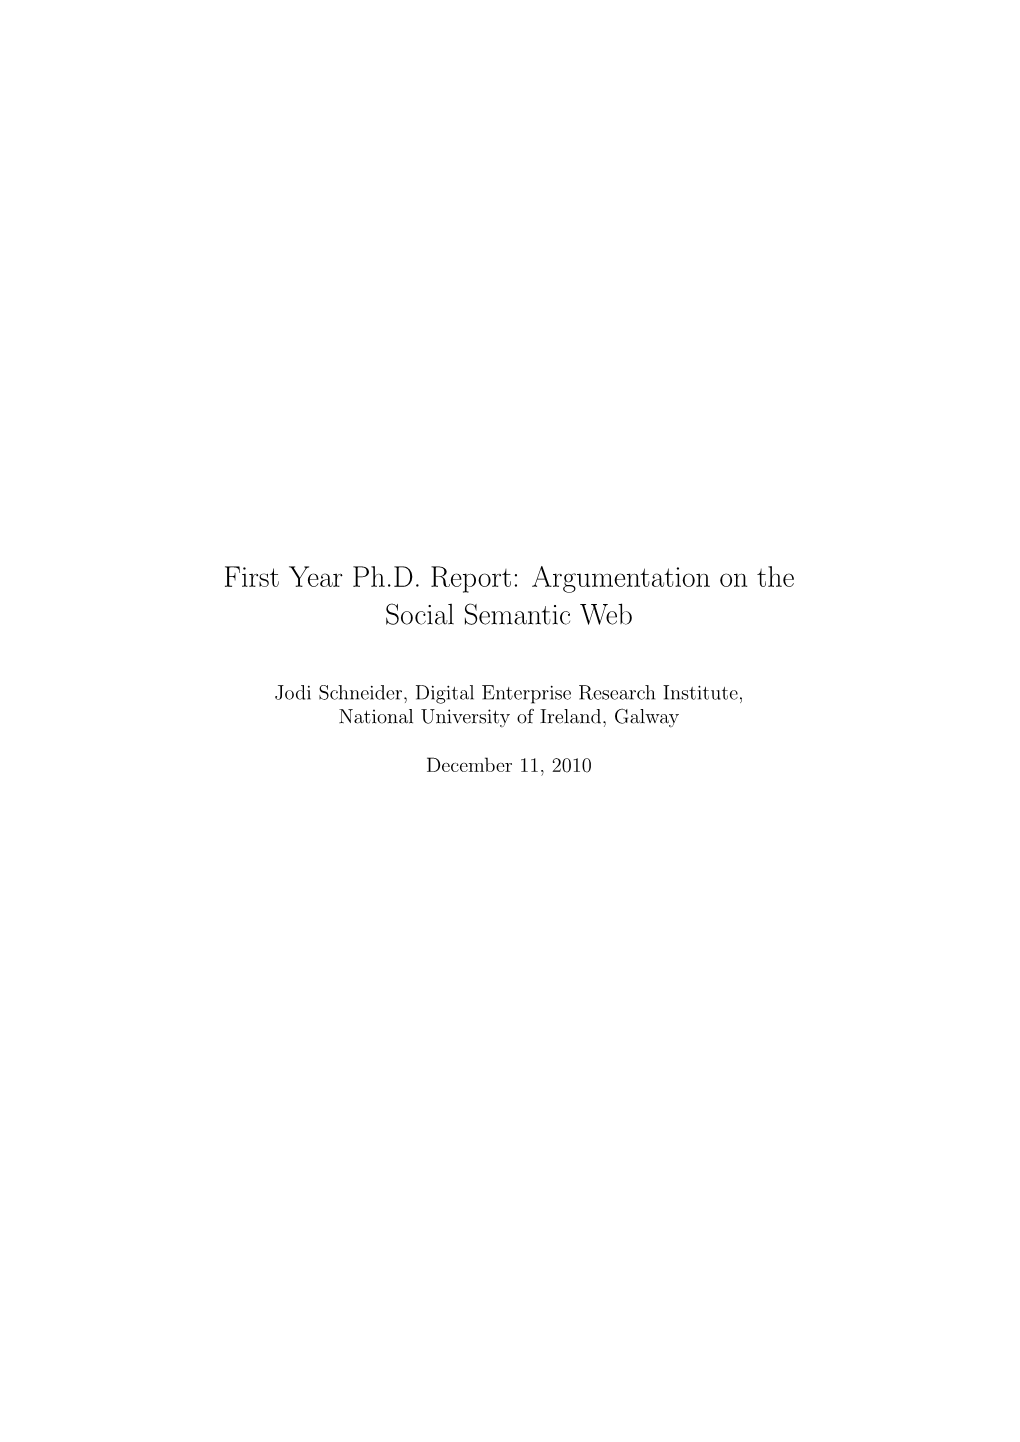 First Year Ph.D. Report: Argumentation on the Social Semantic Web